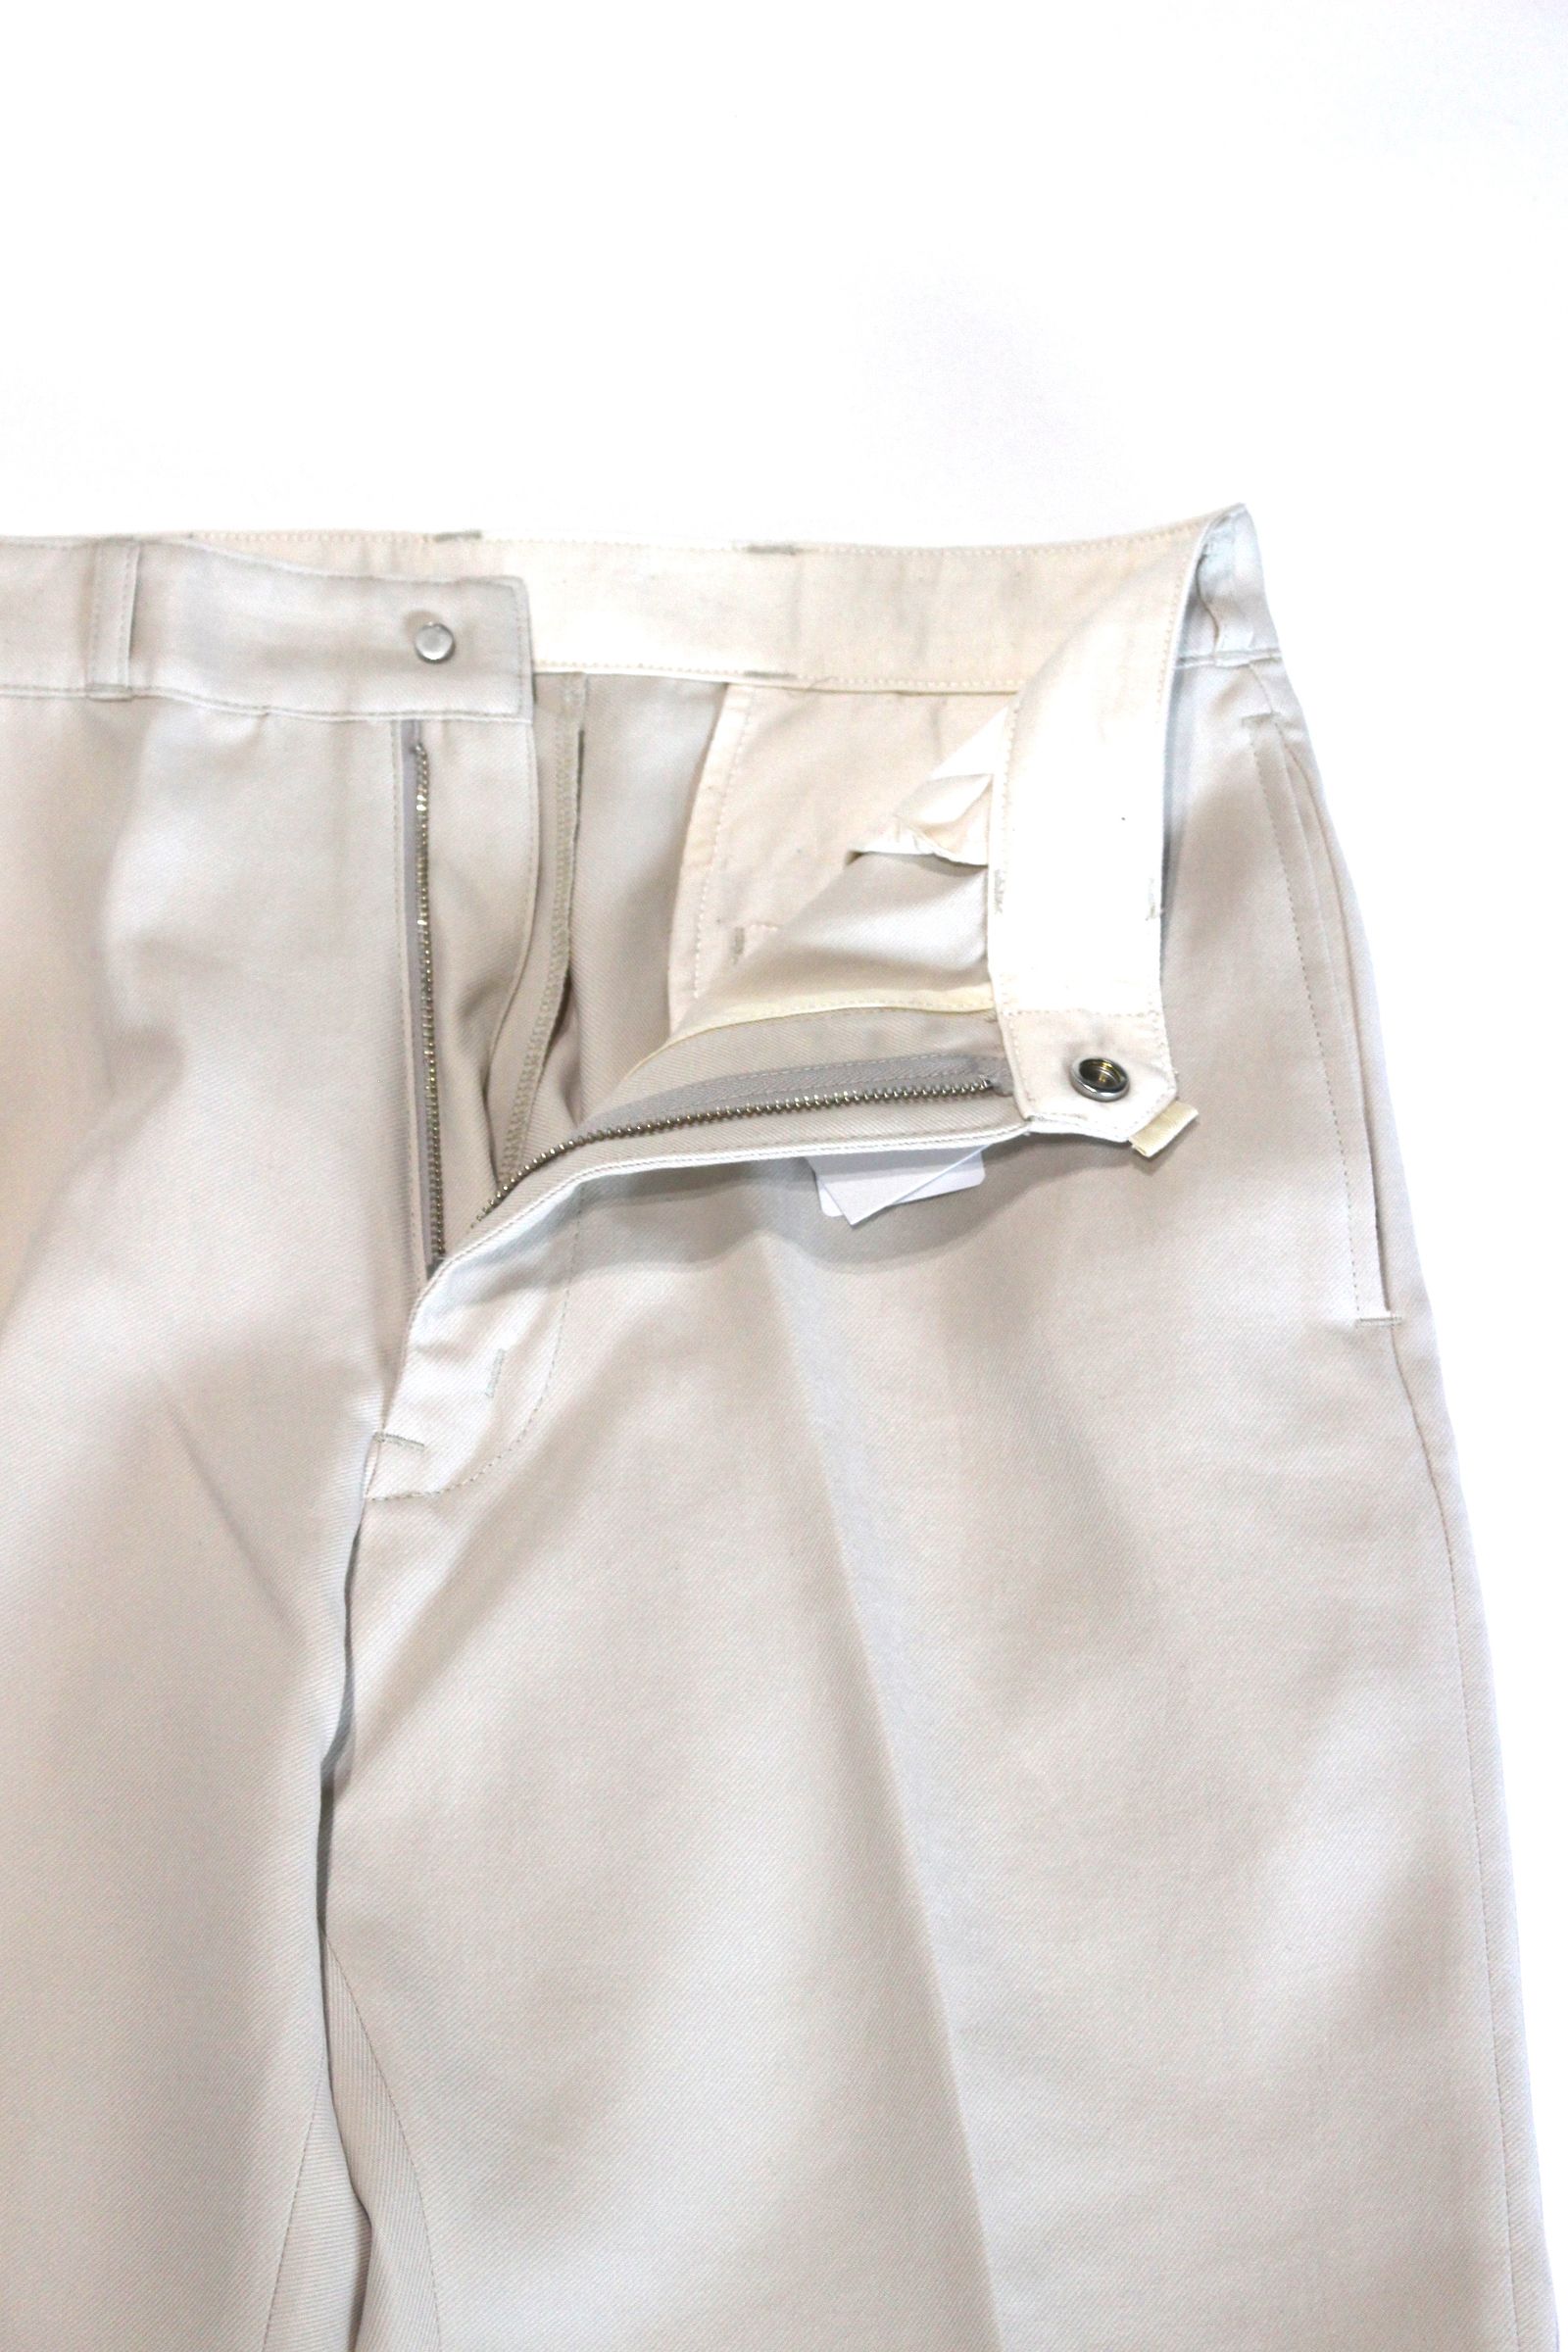 saby - POLY WORK PANTS -FULLY DULL SPAN TWILL- /ワークパンツ